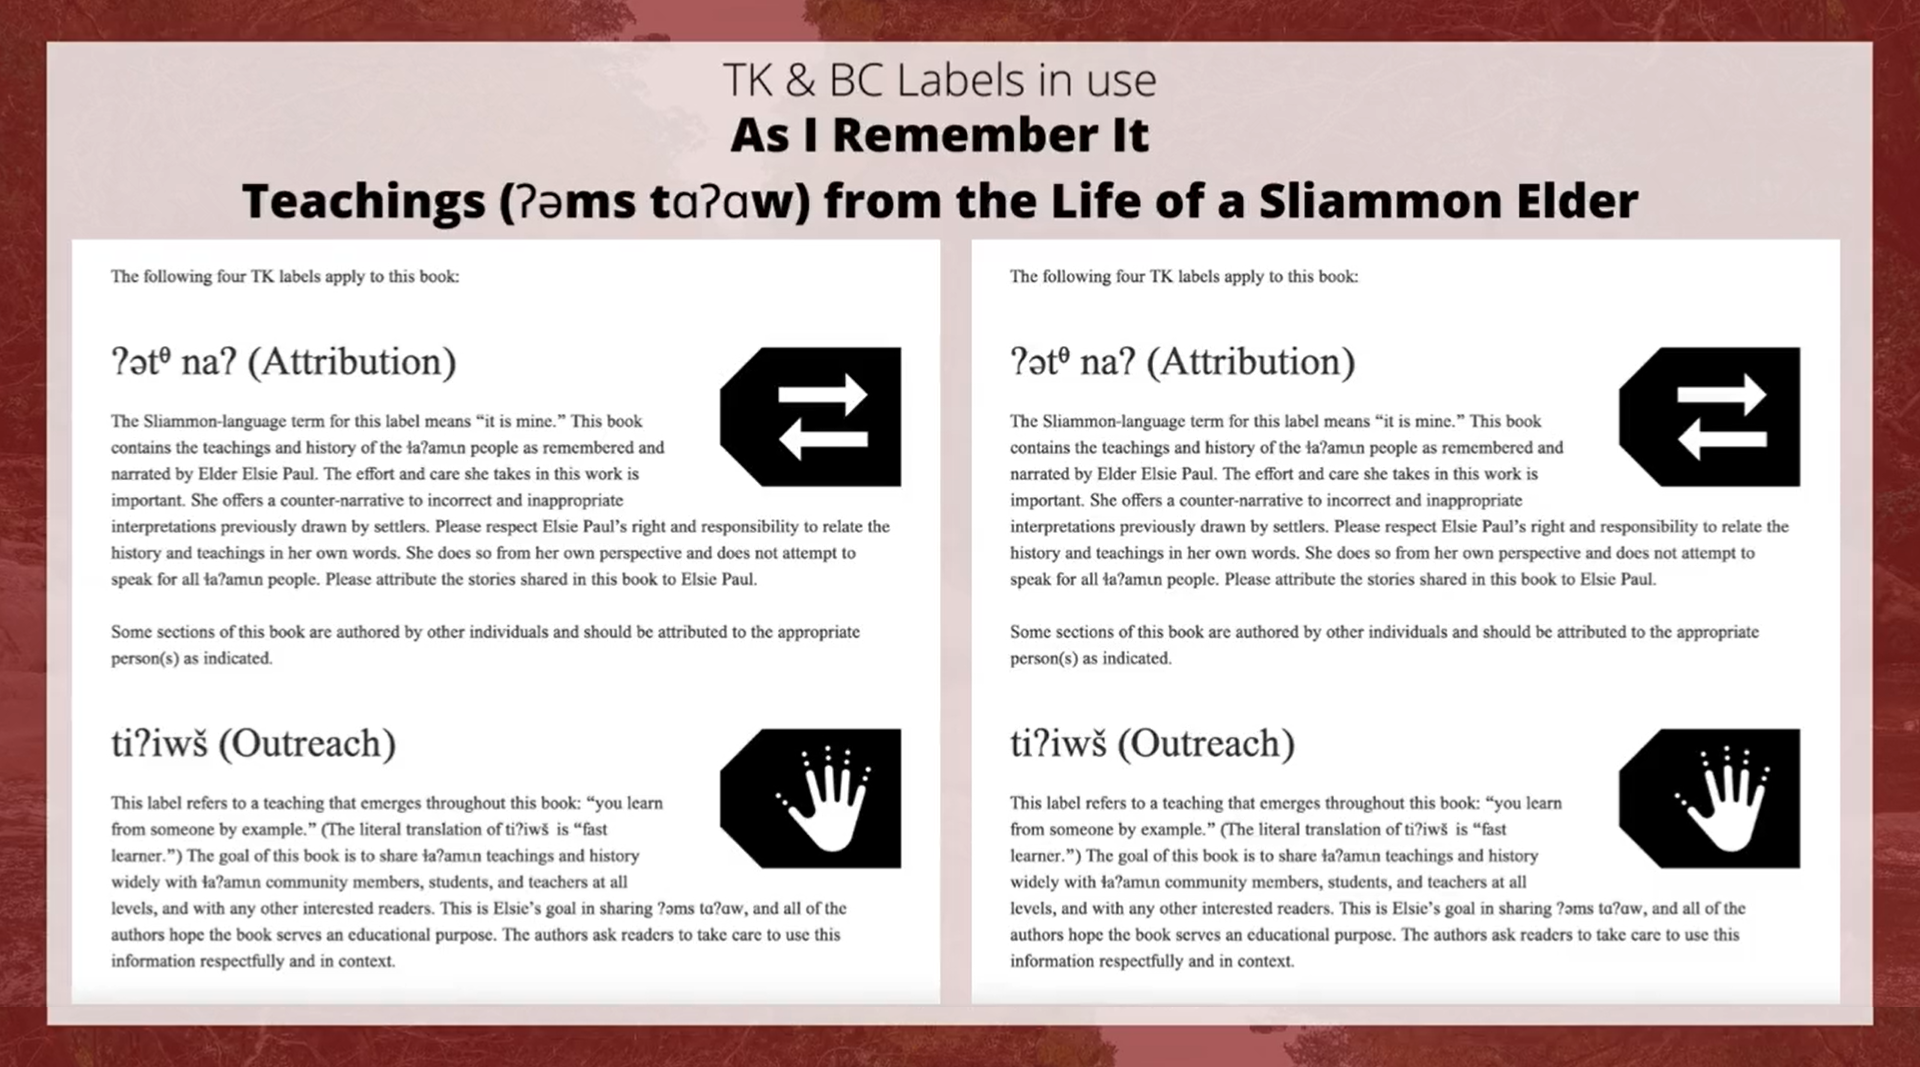 Black text and icon on a decorative red background. “TK & BC Labels in use. As I Remember It: Teachings (Ɂəms tɑɁɑw) from the Life of a Sliammon Elder.” Below are two side-by-side screenshots from Elsie Paul’s website showing 4 TK Label icons with their accompanying customized text.